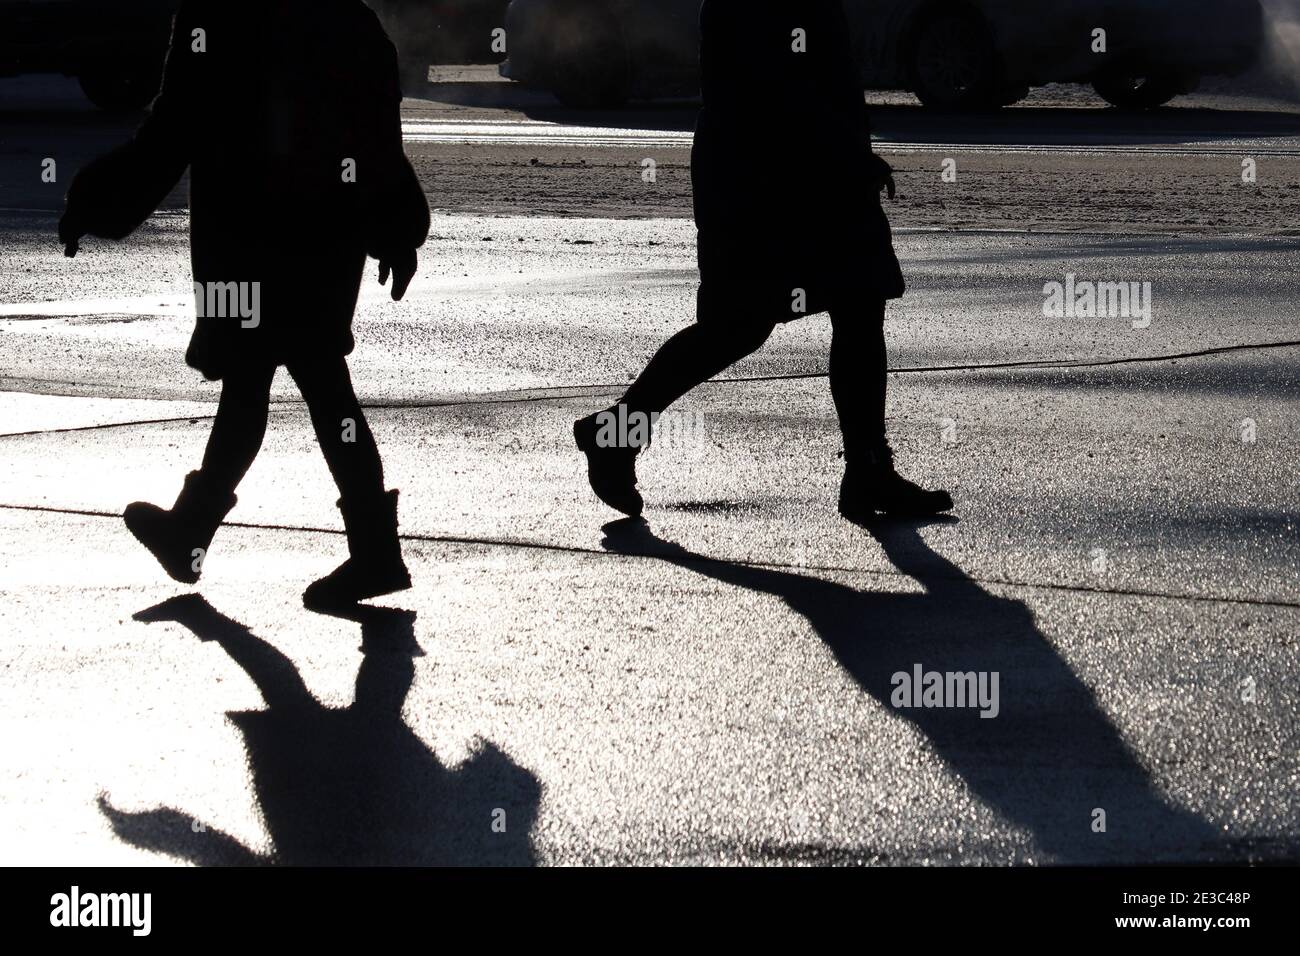 Black silhouettes and shadow of people walking down on a city street on cars background. Concept of hurrying pedestrians, population Stock Photo